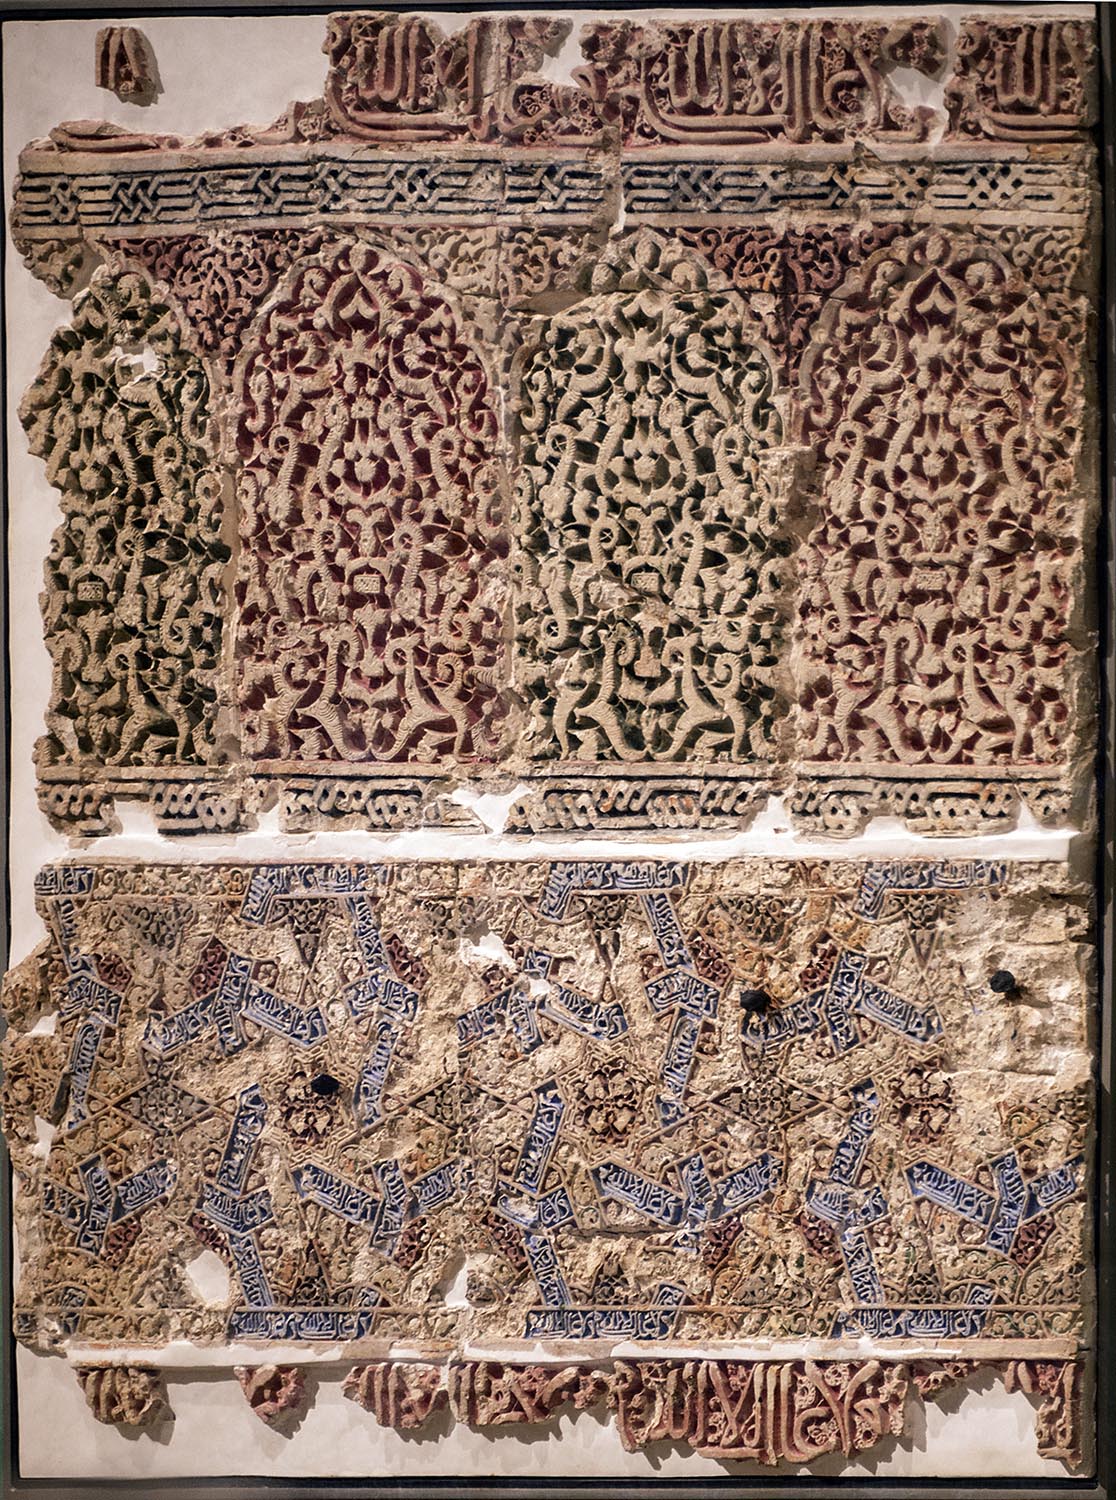 Polychromatic plasterwork panel with inscriptions on display at Alhambra Museum